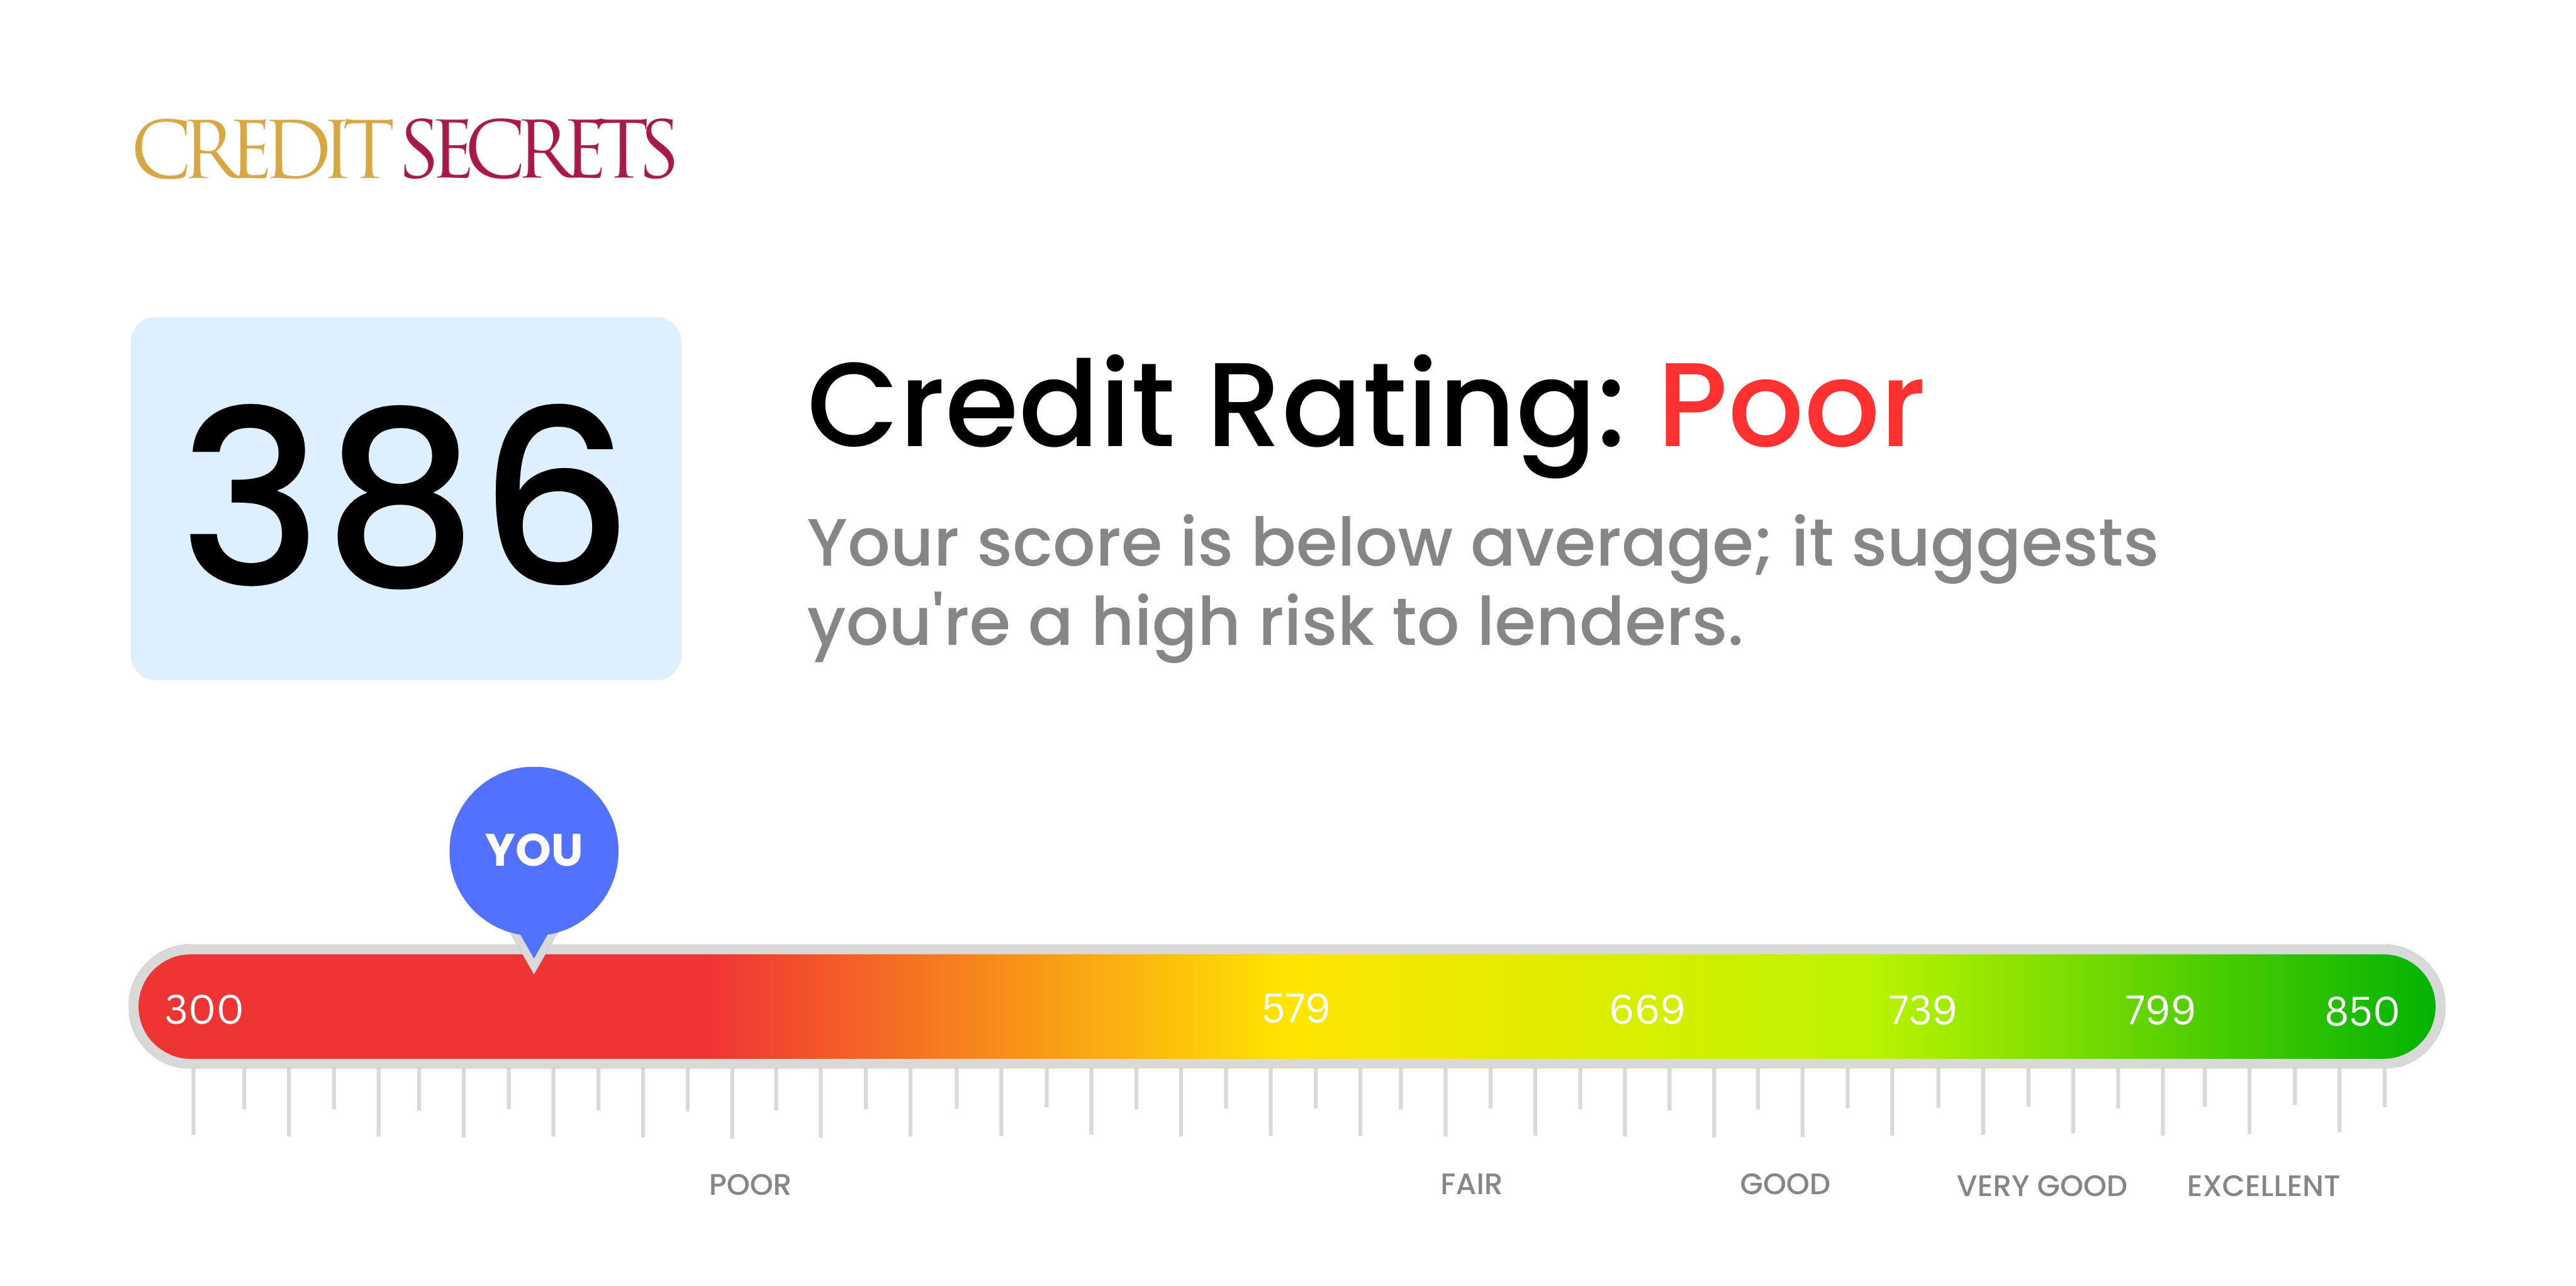 Is 386 a good credit score?